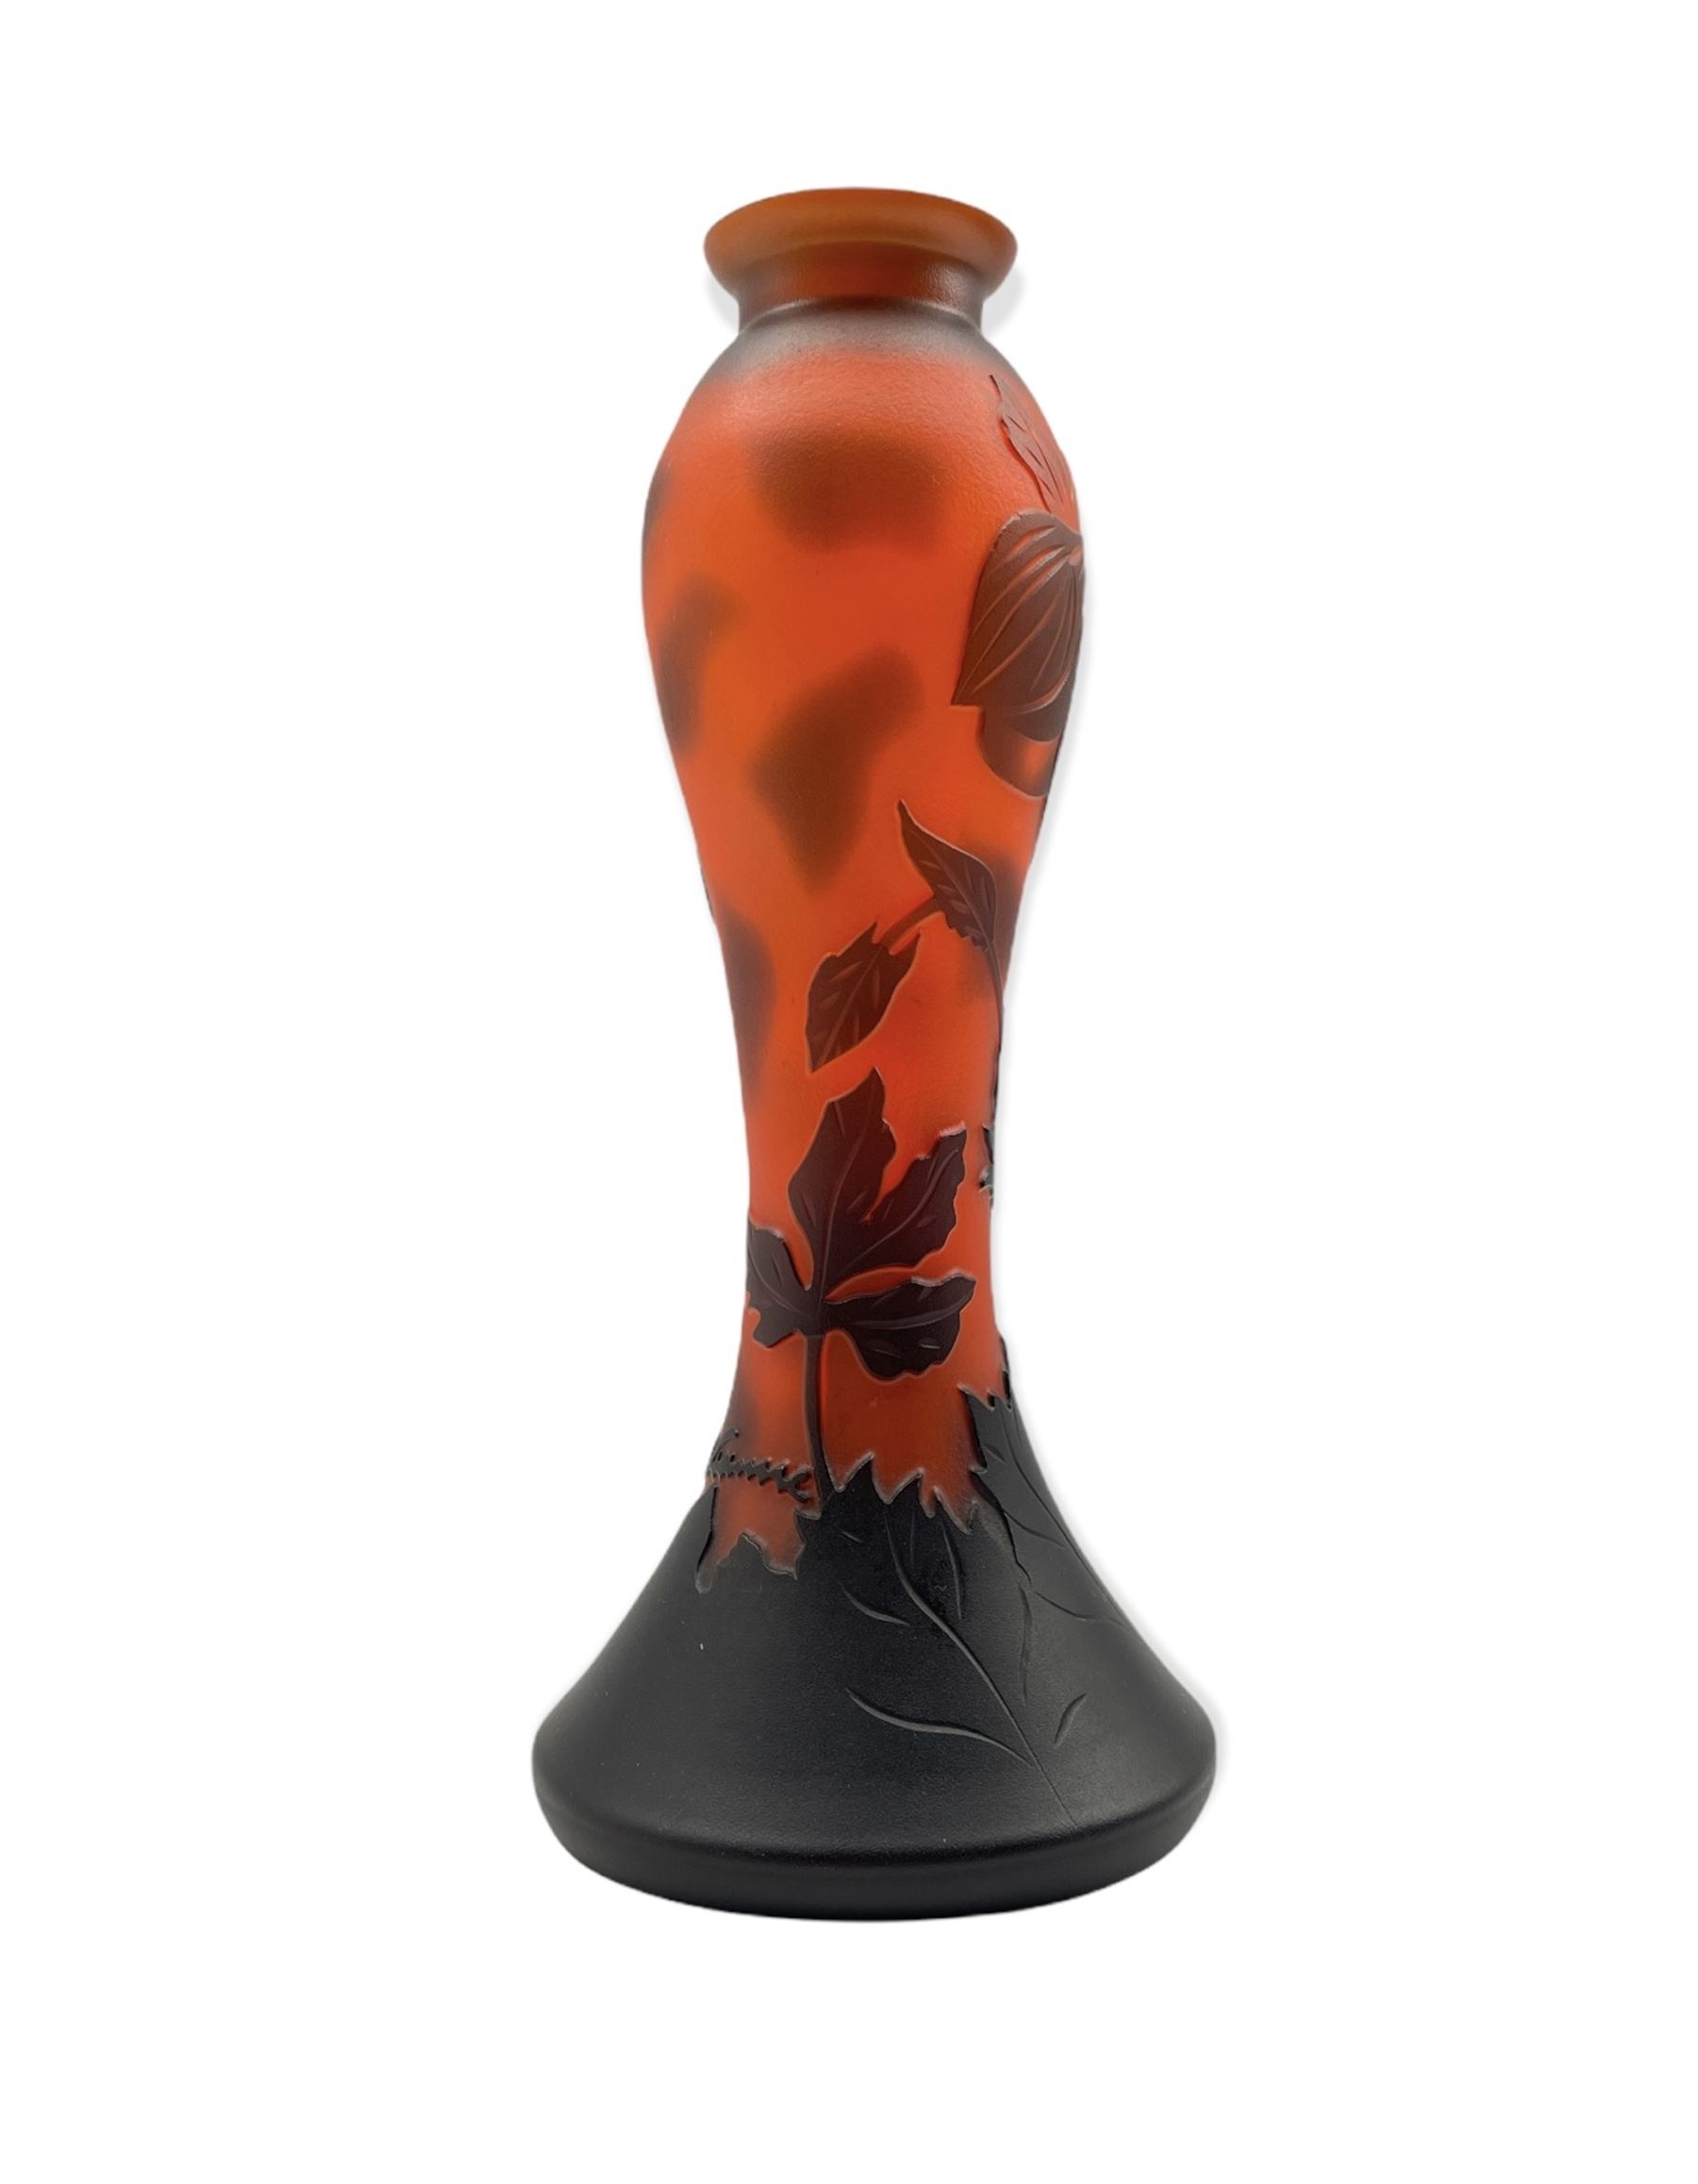 A modern cameo glass vase of waisted form